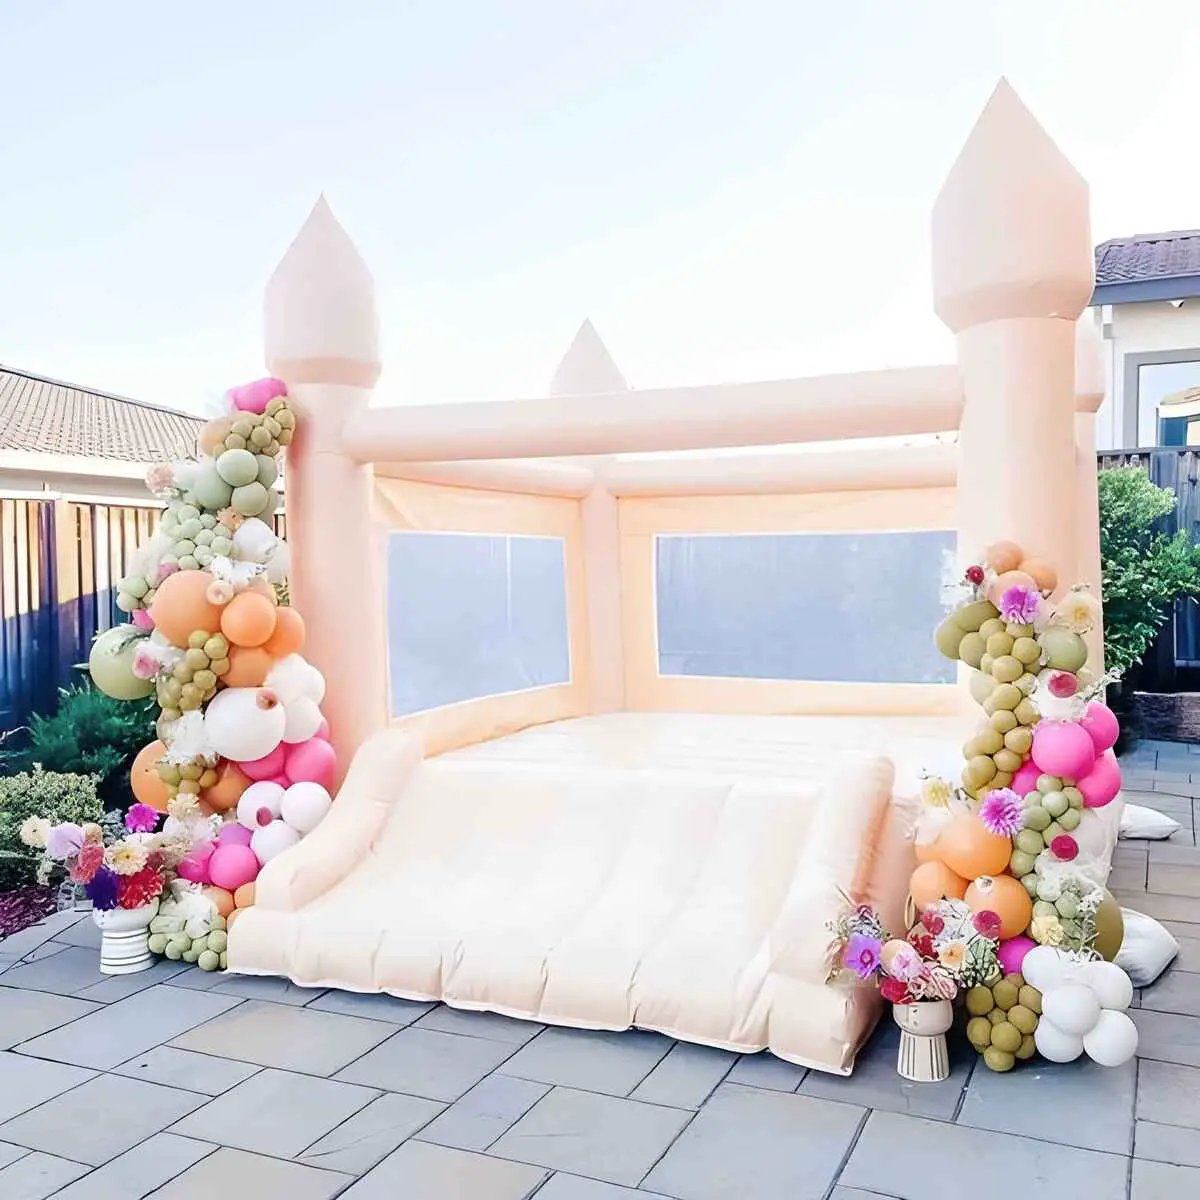 Pastel pink small bounce house decorated with flowers and balloons for a backyard party